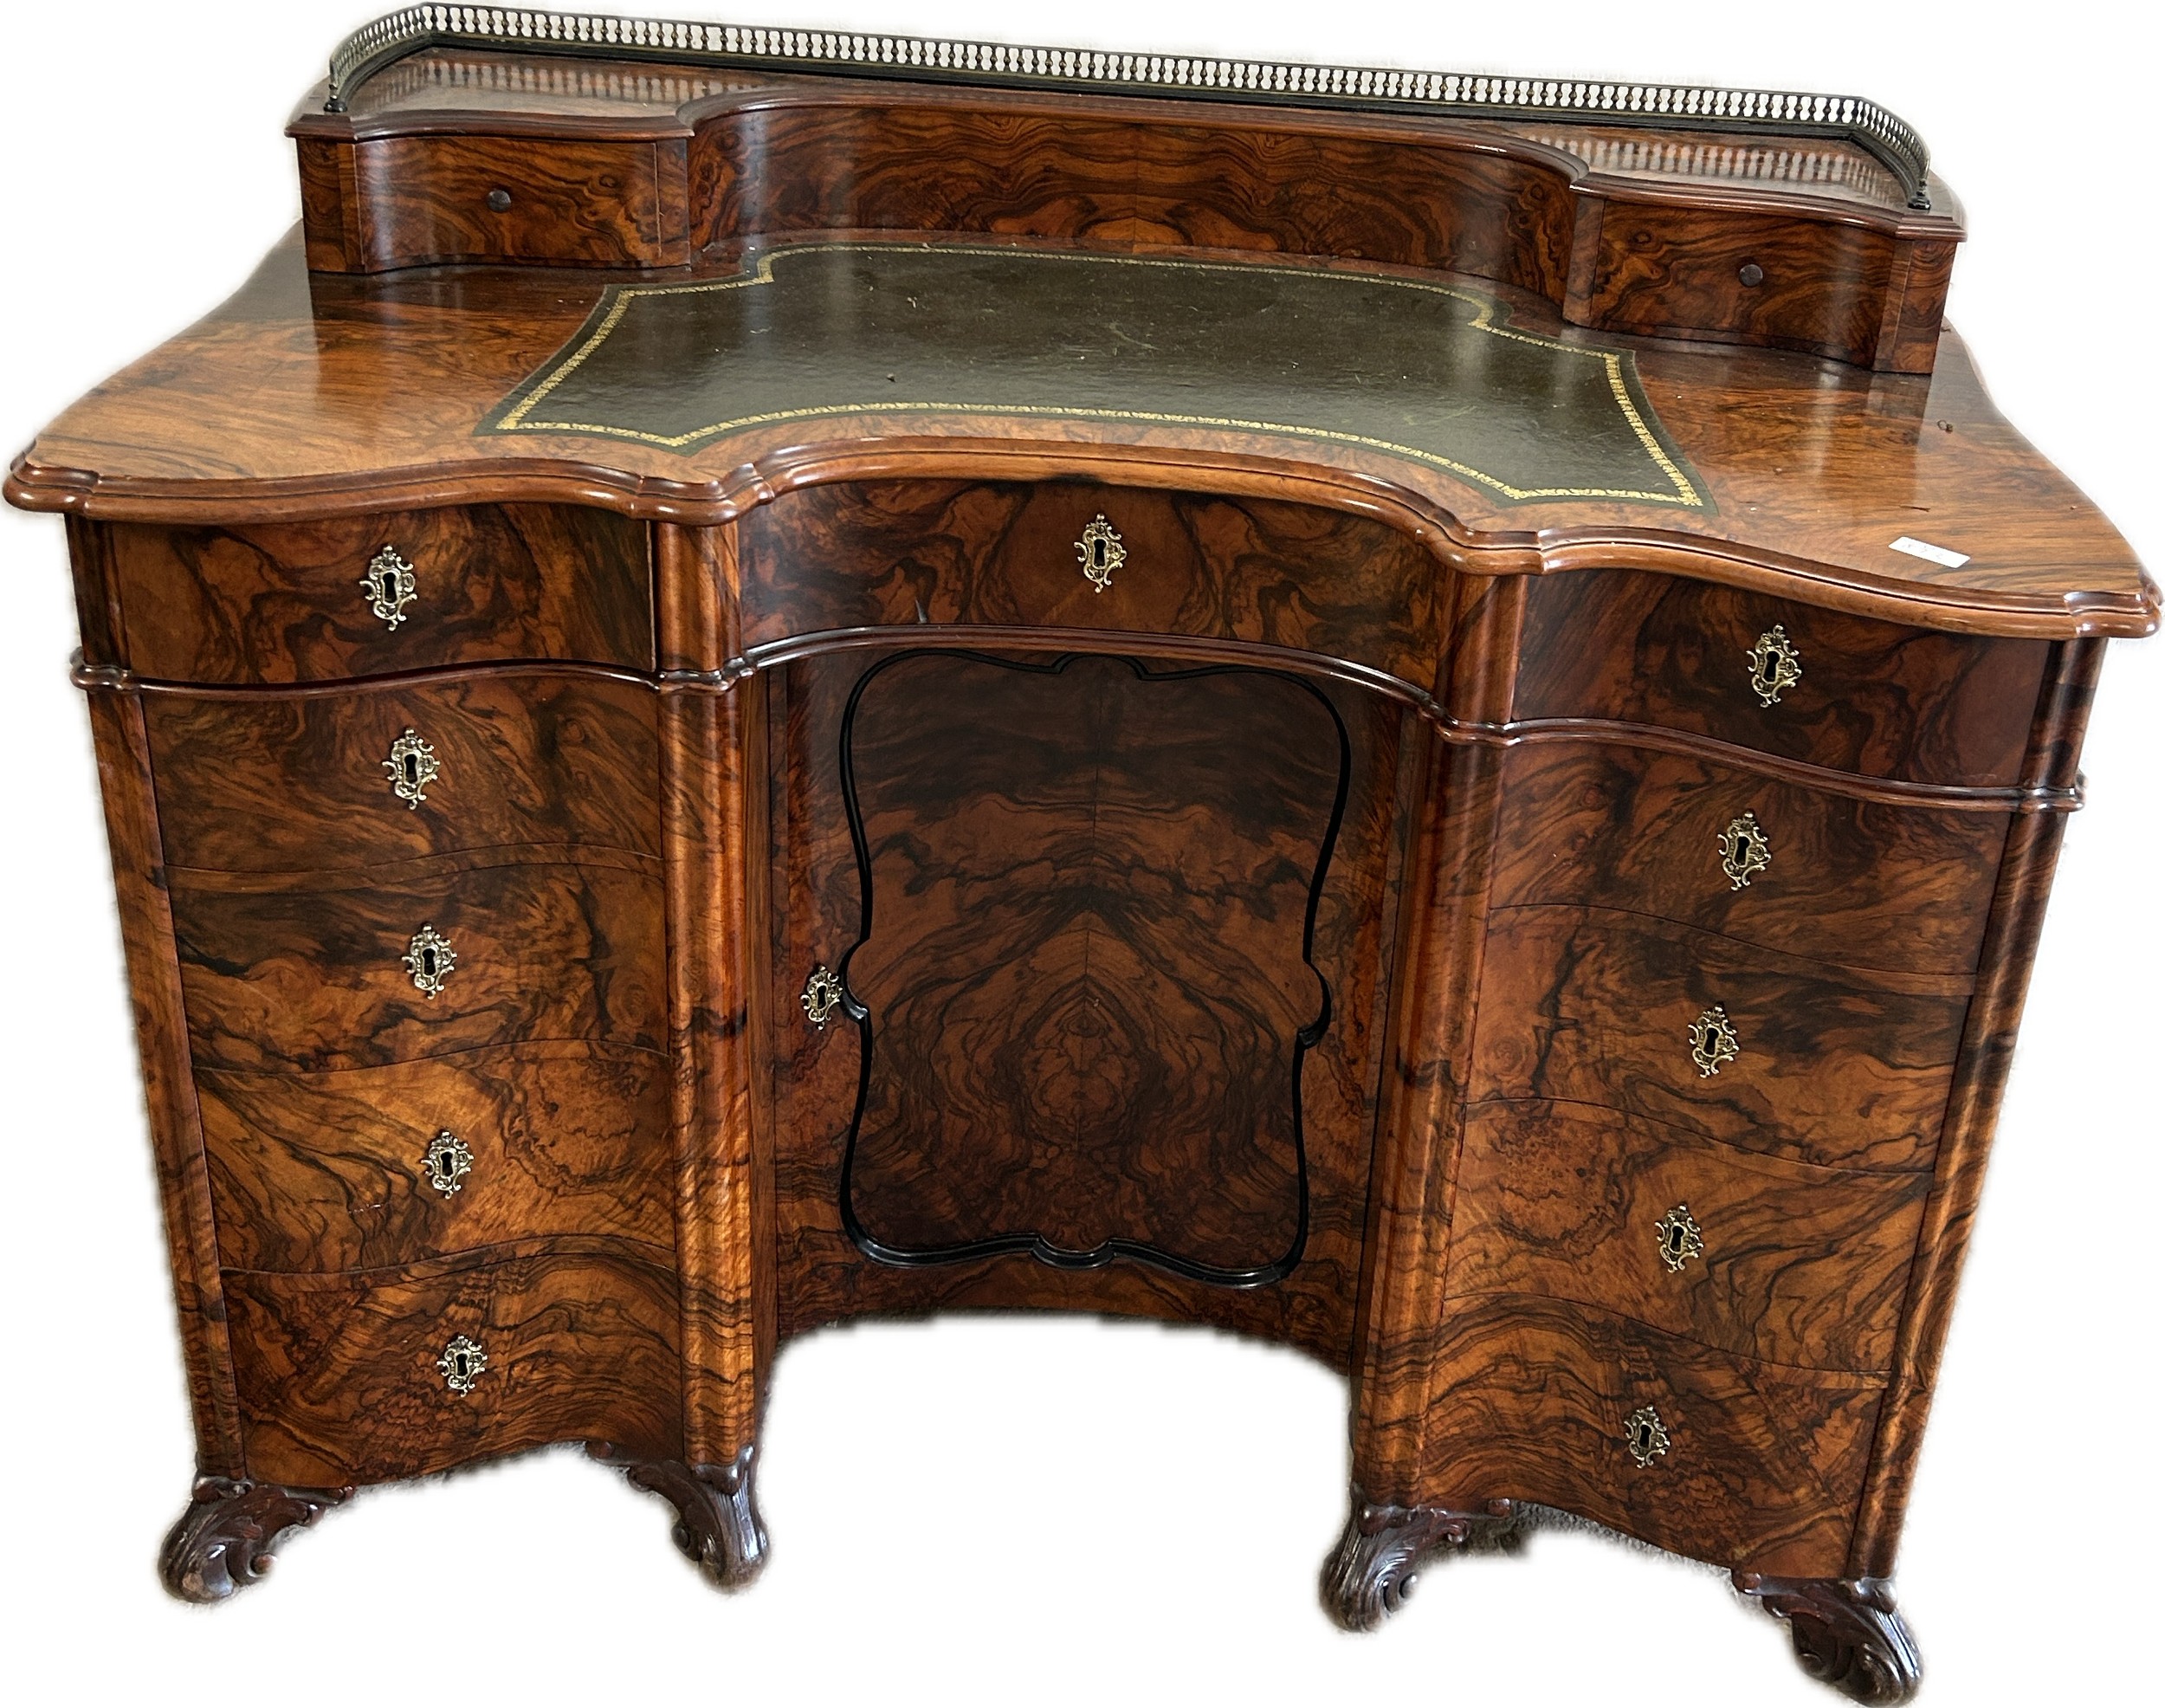 Reproduction of a 19th century Victorian walnut desk